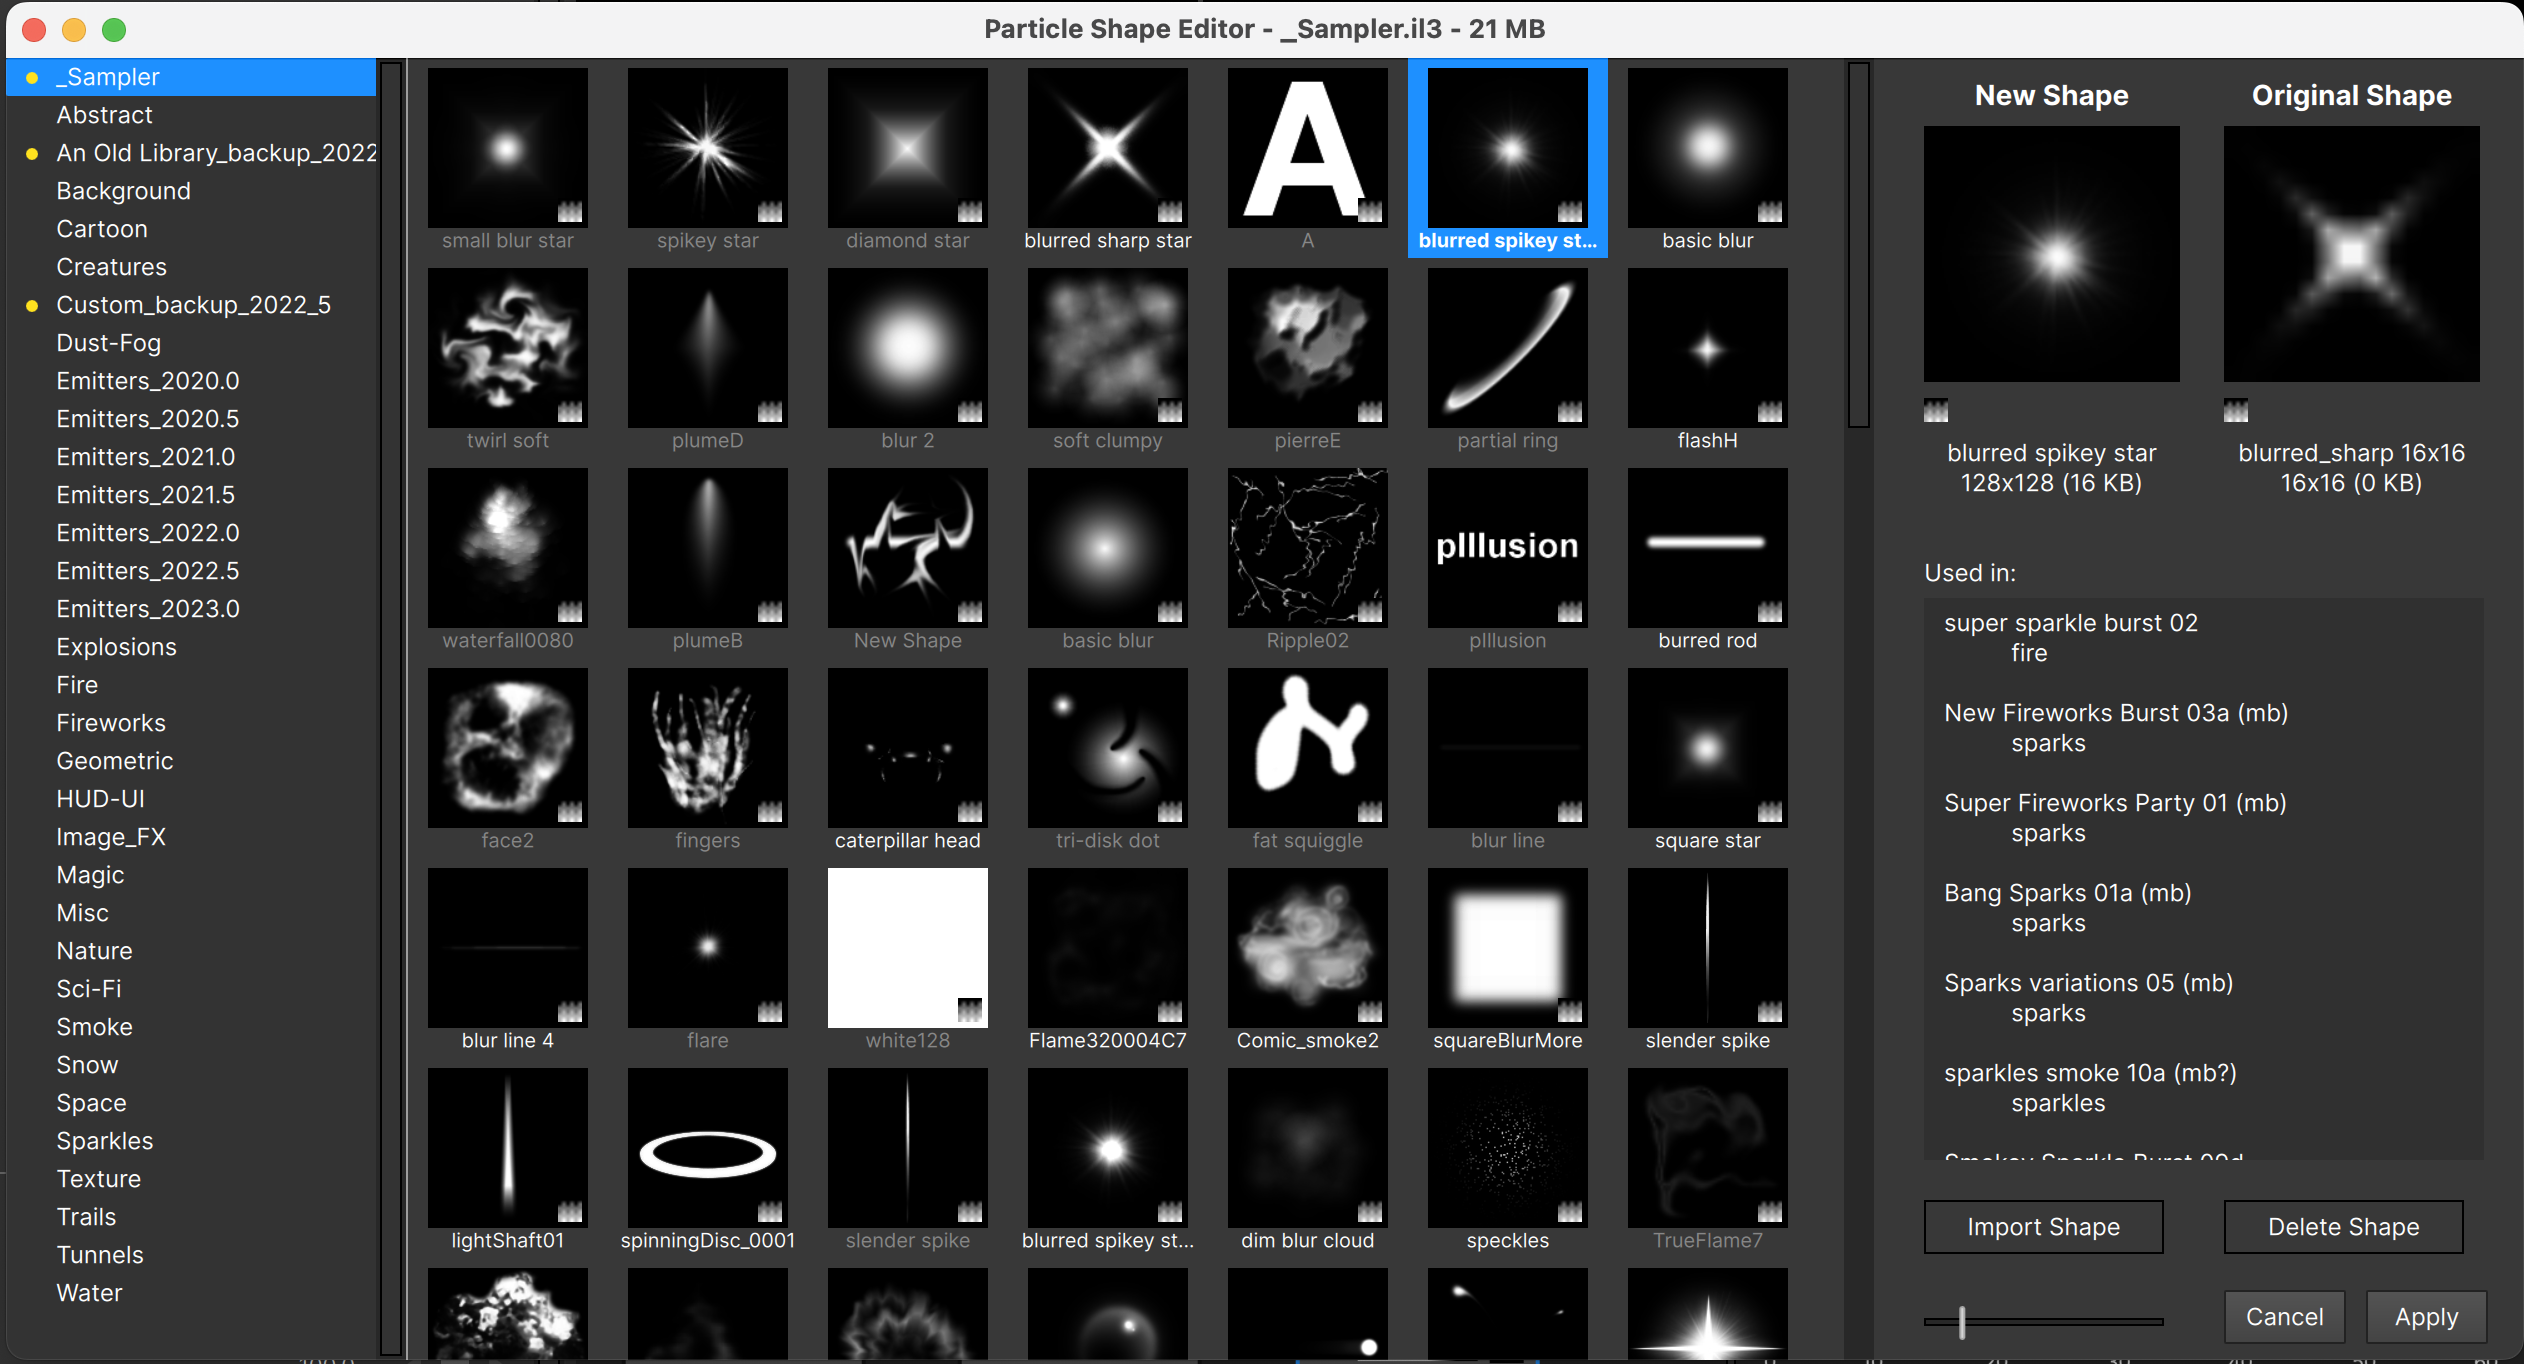 Particle Shape Editor